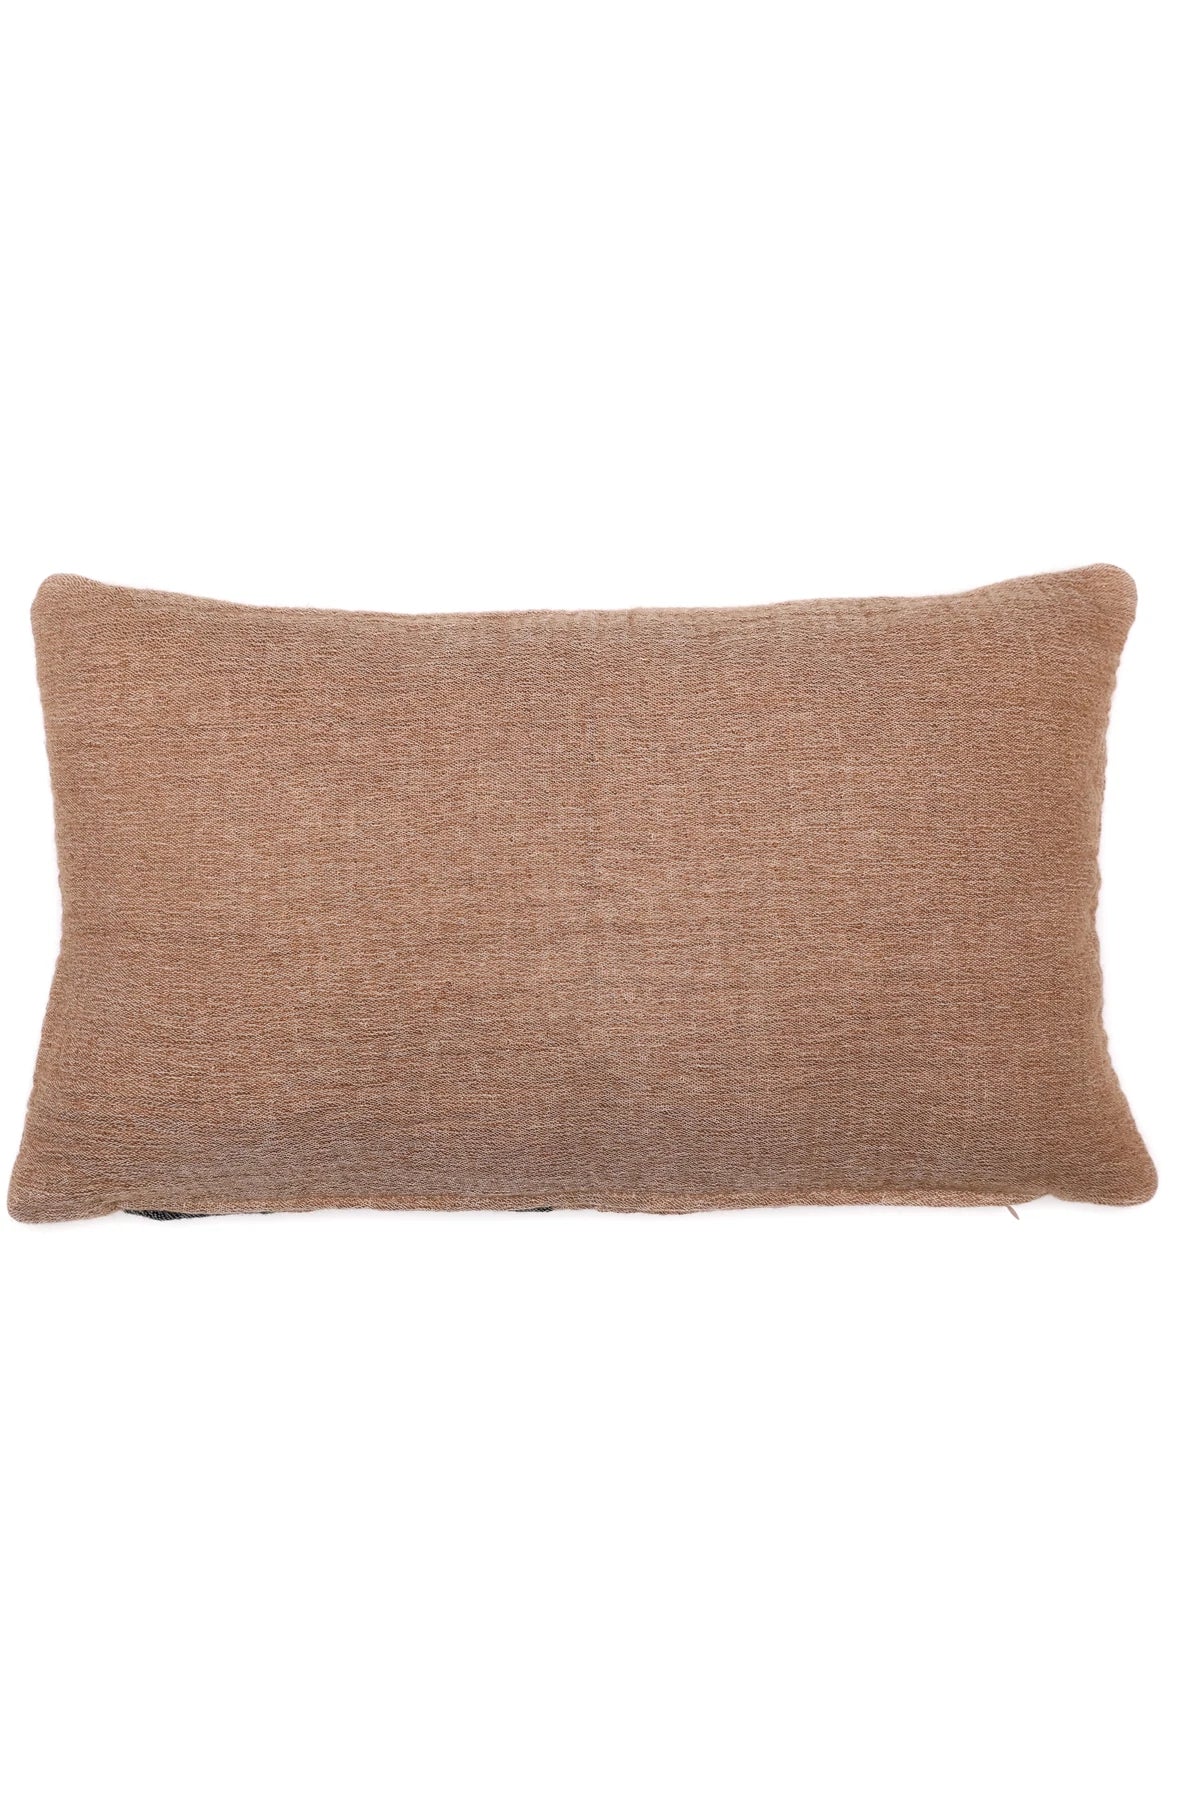 The Aria Pillow Sham - wild and heart